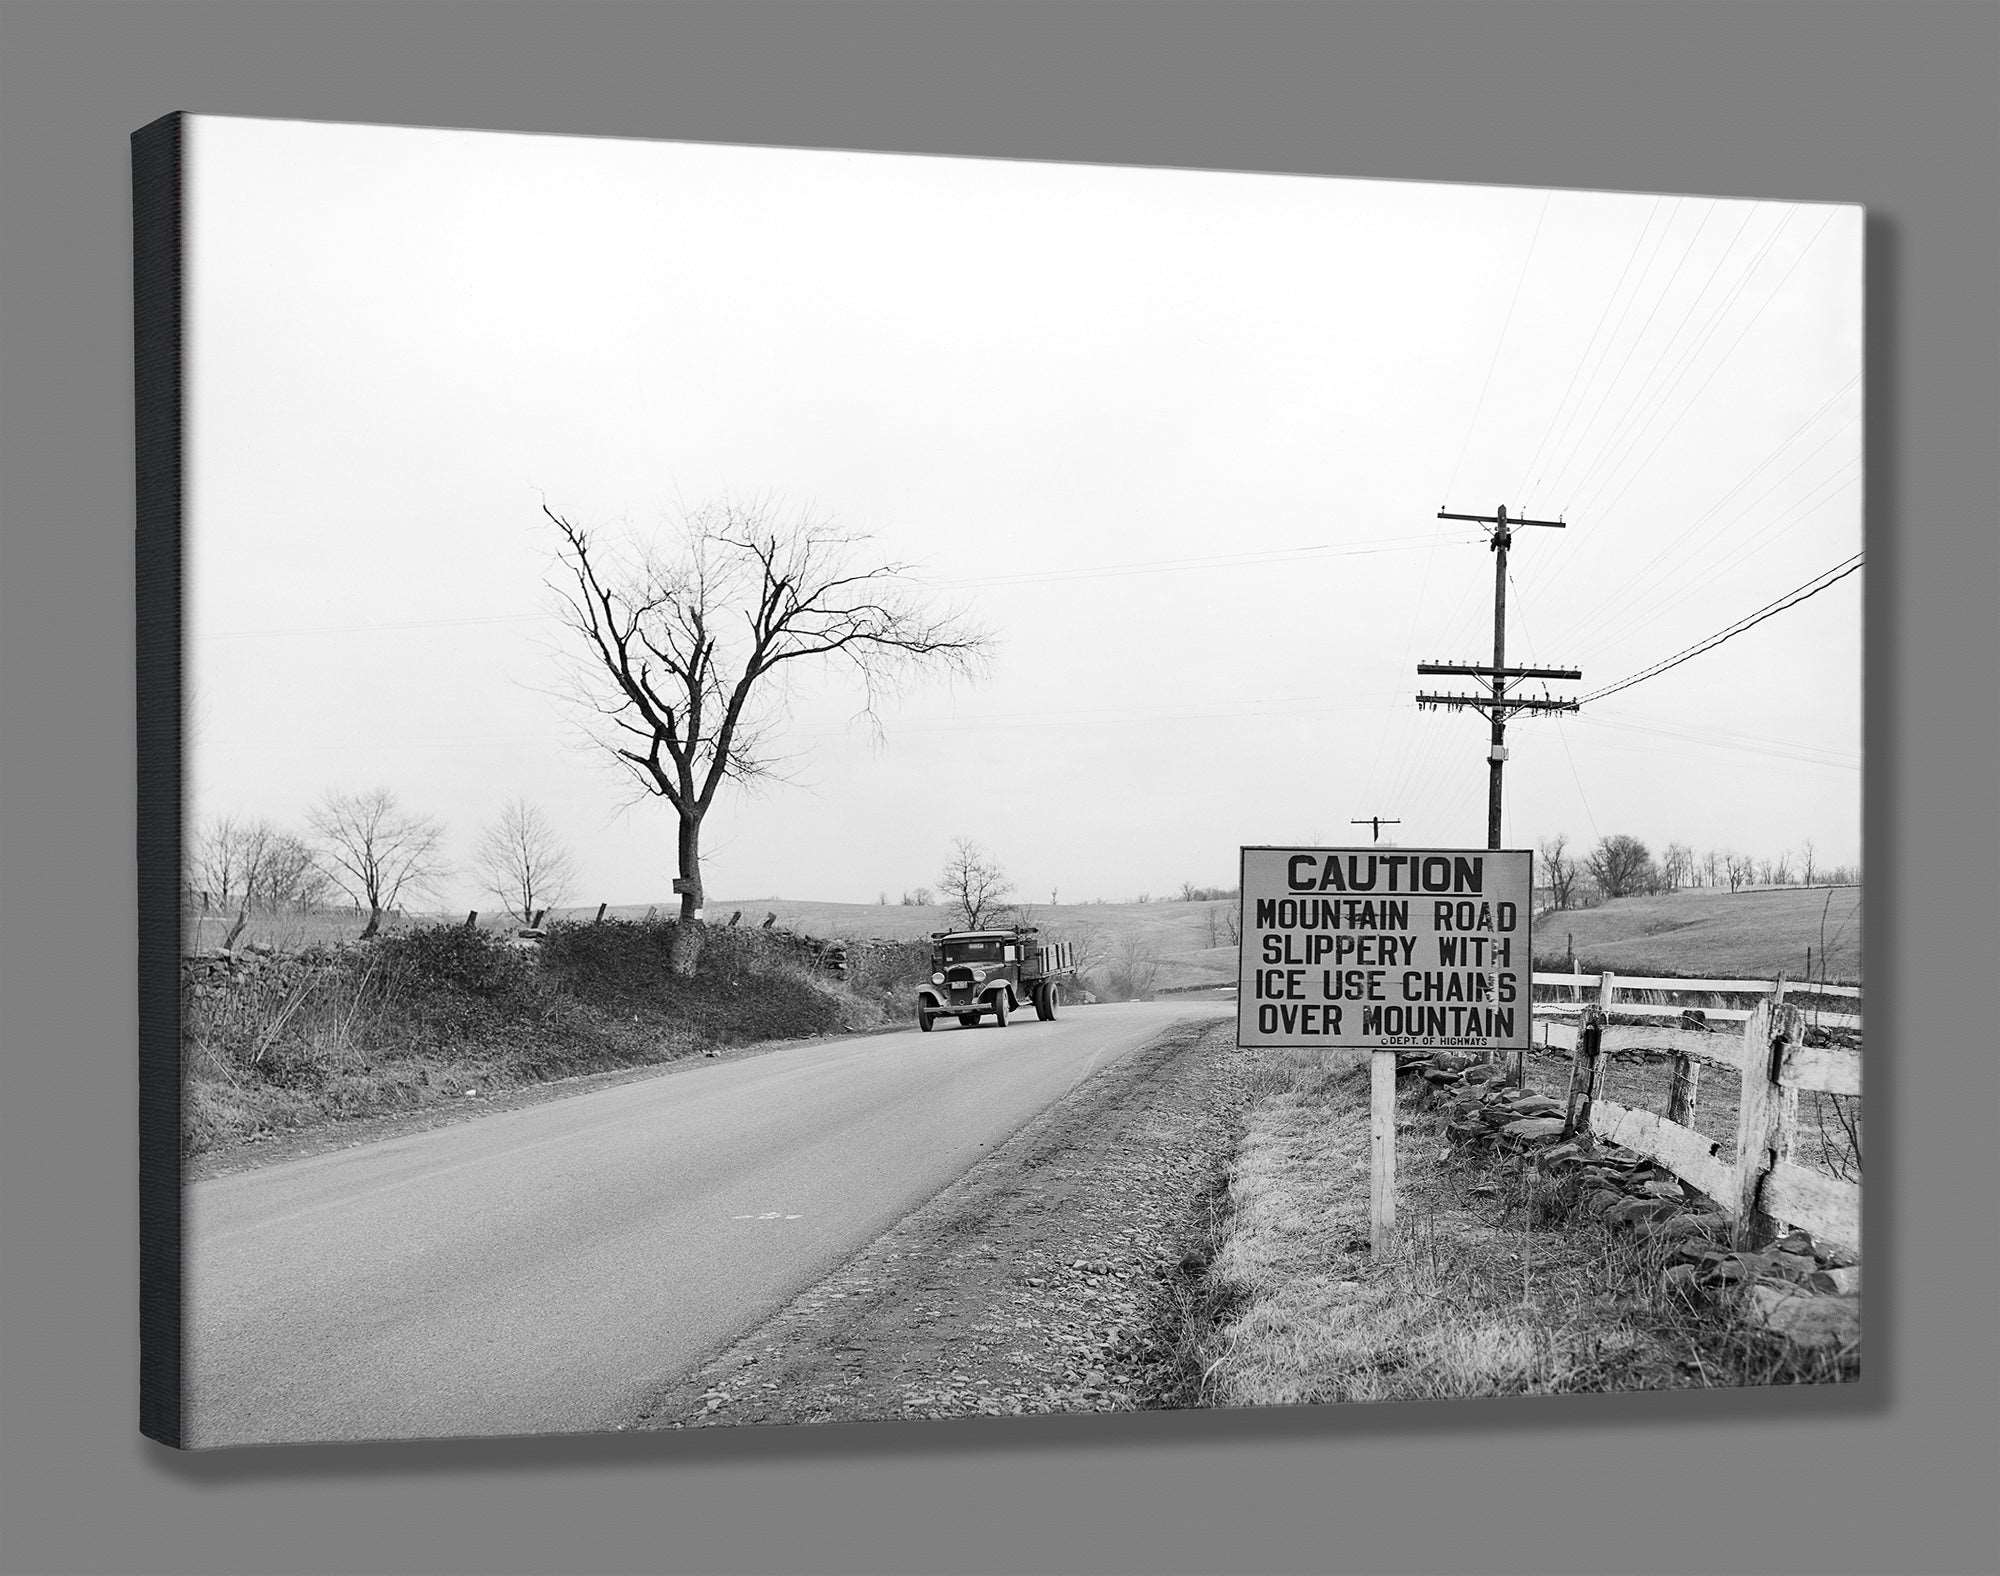 A fine art canvas print of a vintage image of a car on US 50 in Virginia